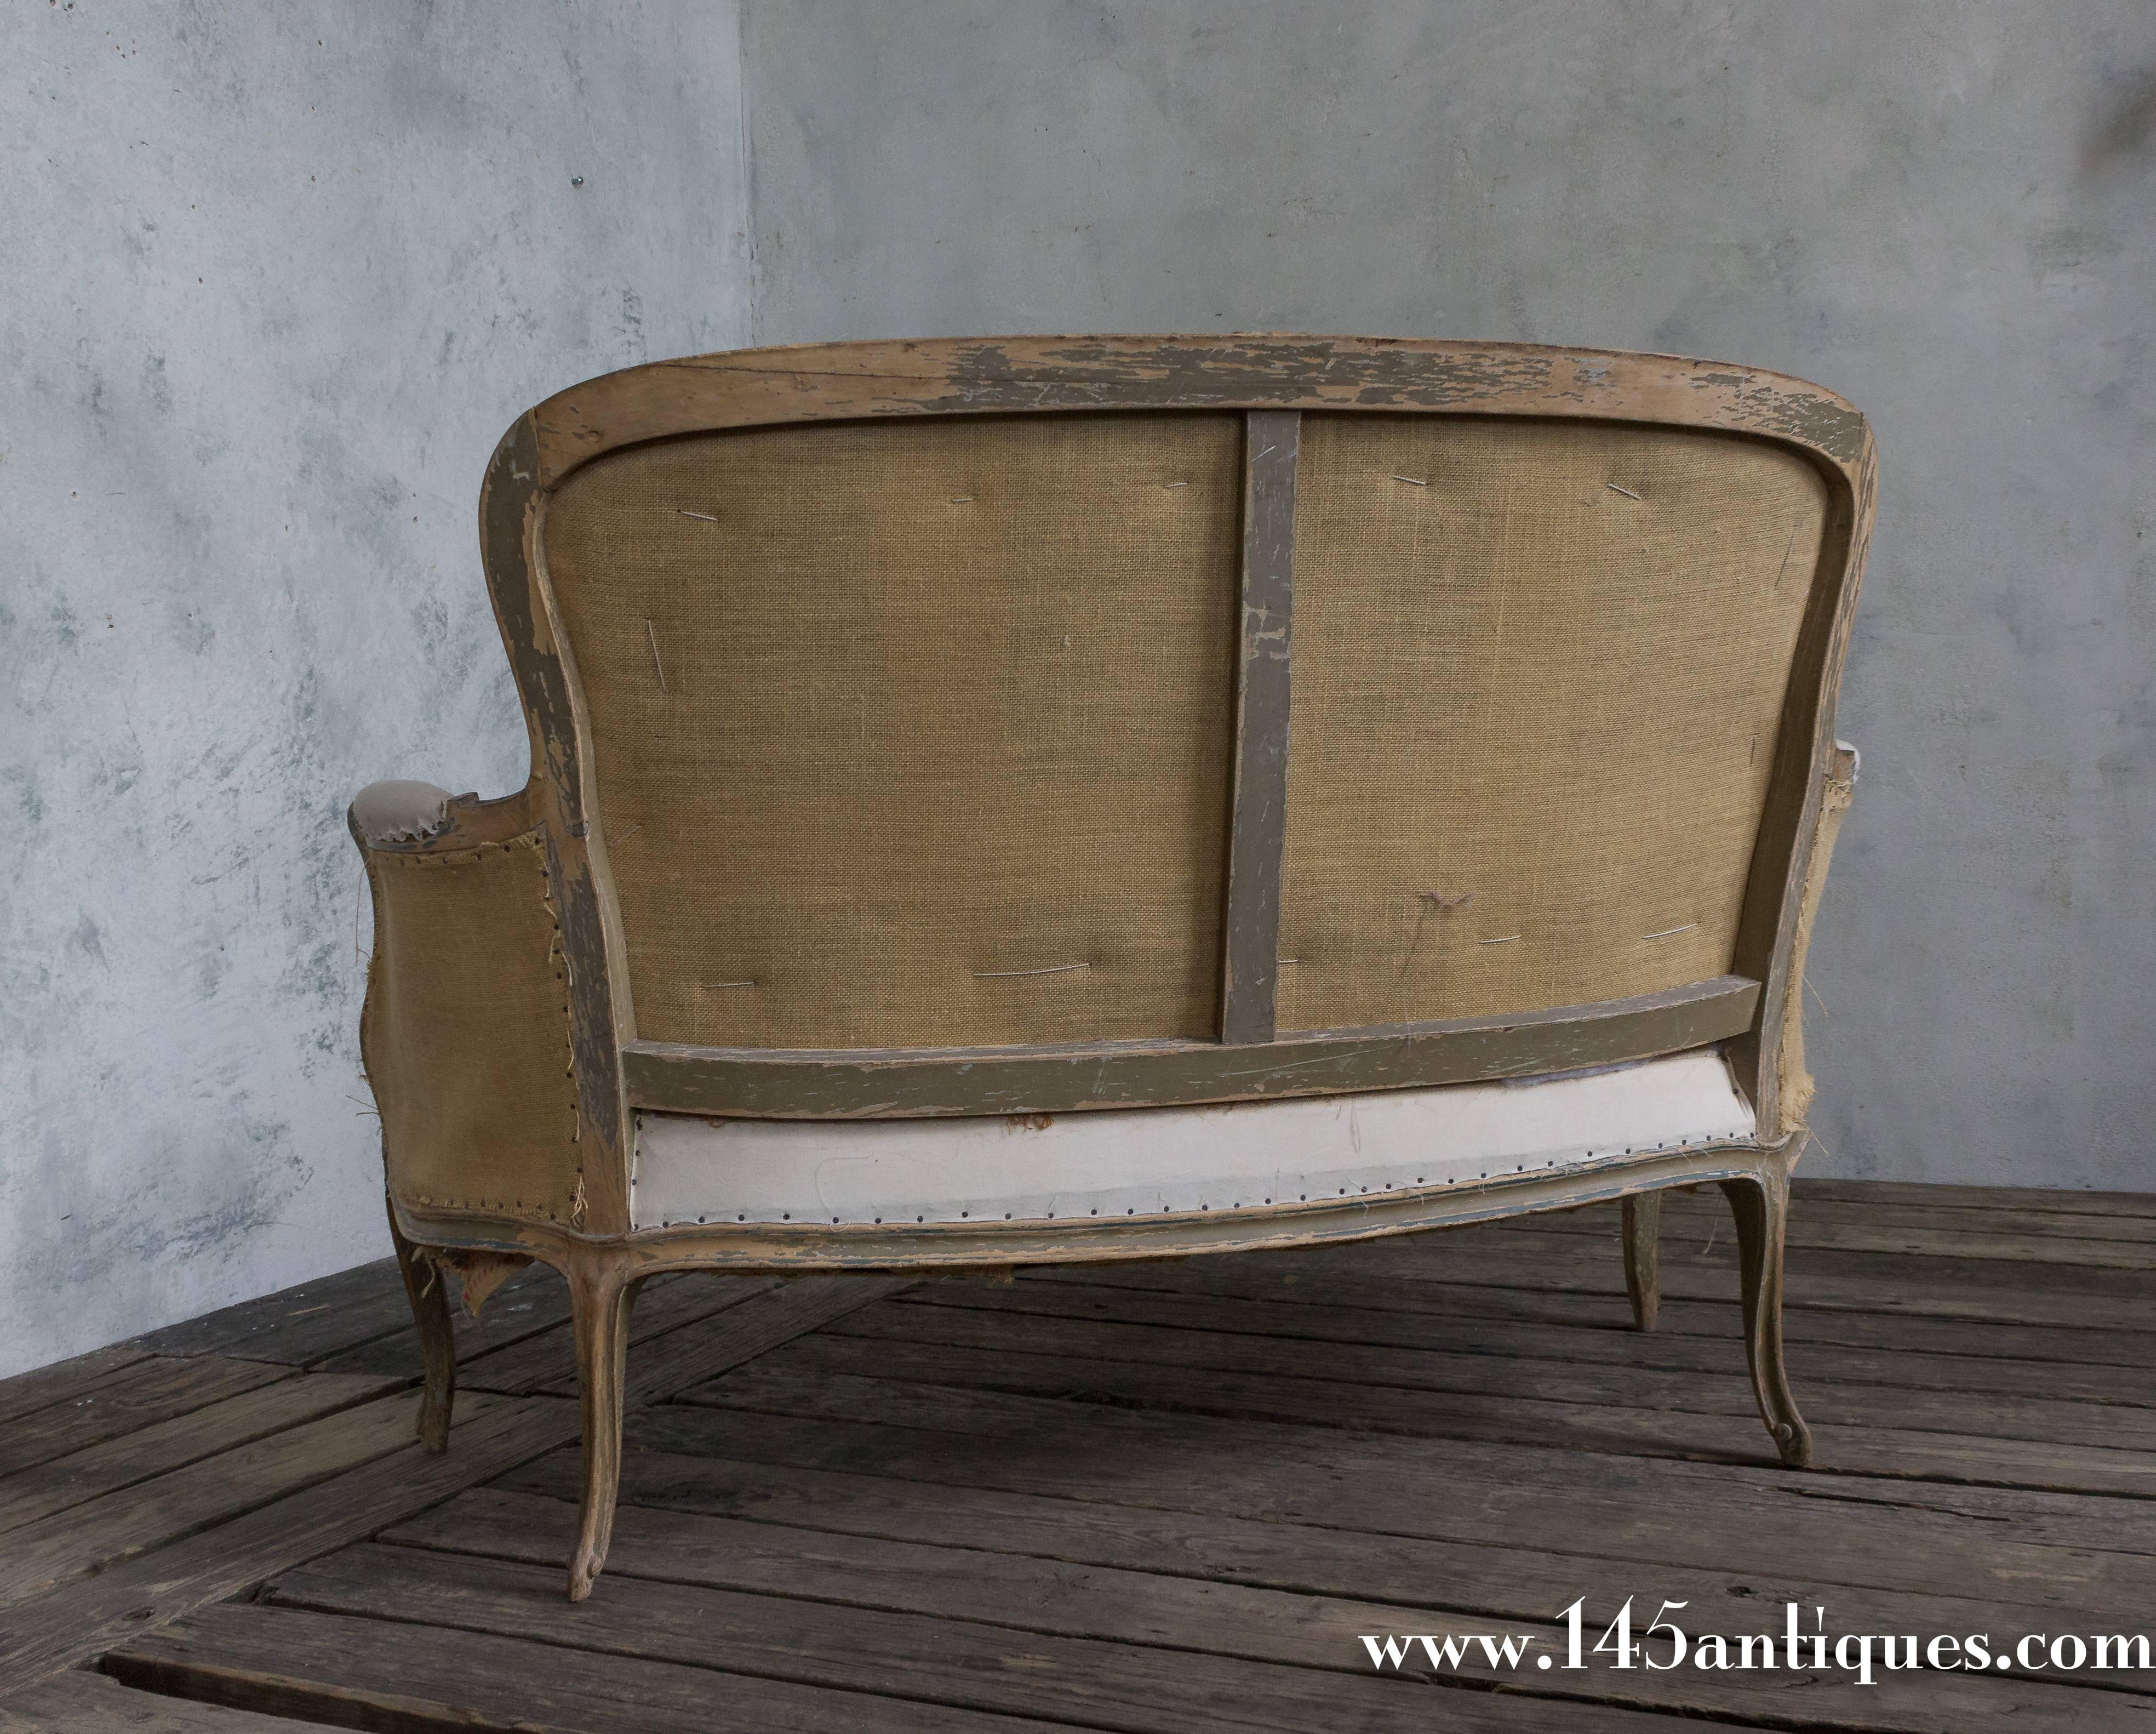 Small 19th Century Settee with Distressed Paint Finish 1